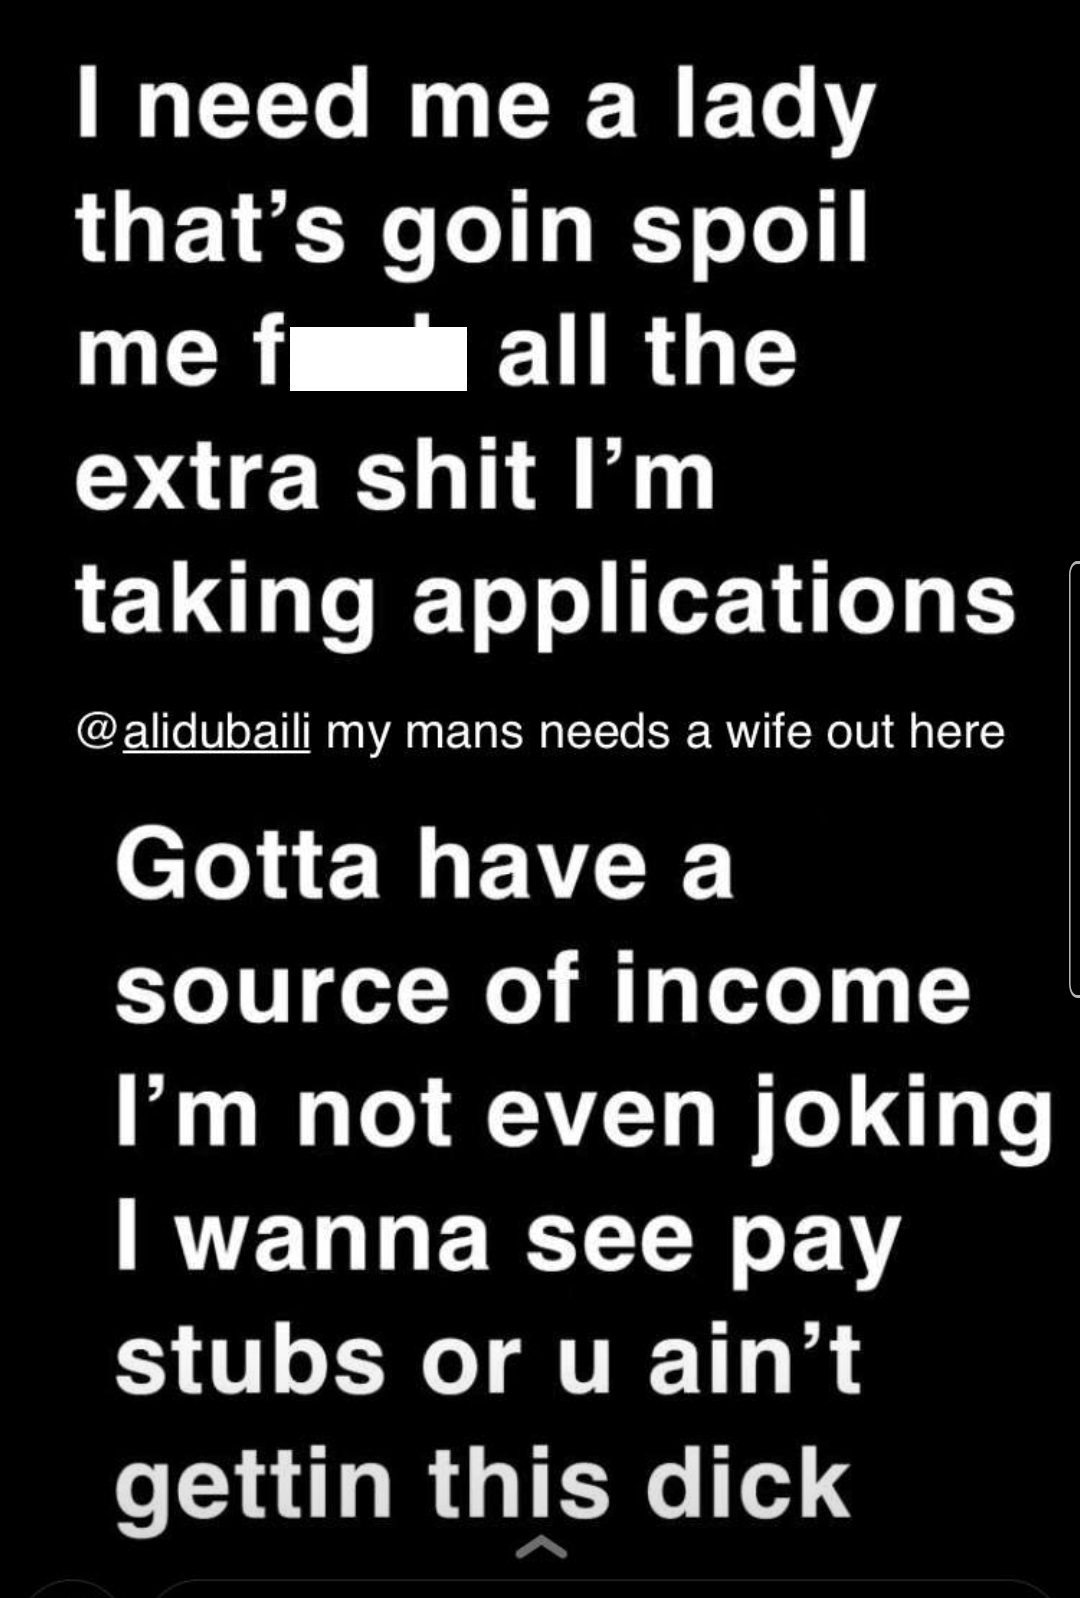 super entitled people - smoking ban - I need me a lady that's goin spoil me f'all the extra shit I'm taking applications my mans needs a wife out here Gotta have a source of income I'm not even joking I wanna see pay stubs or u ain't gettin this dick